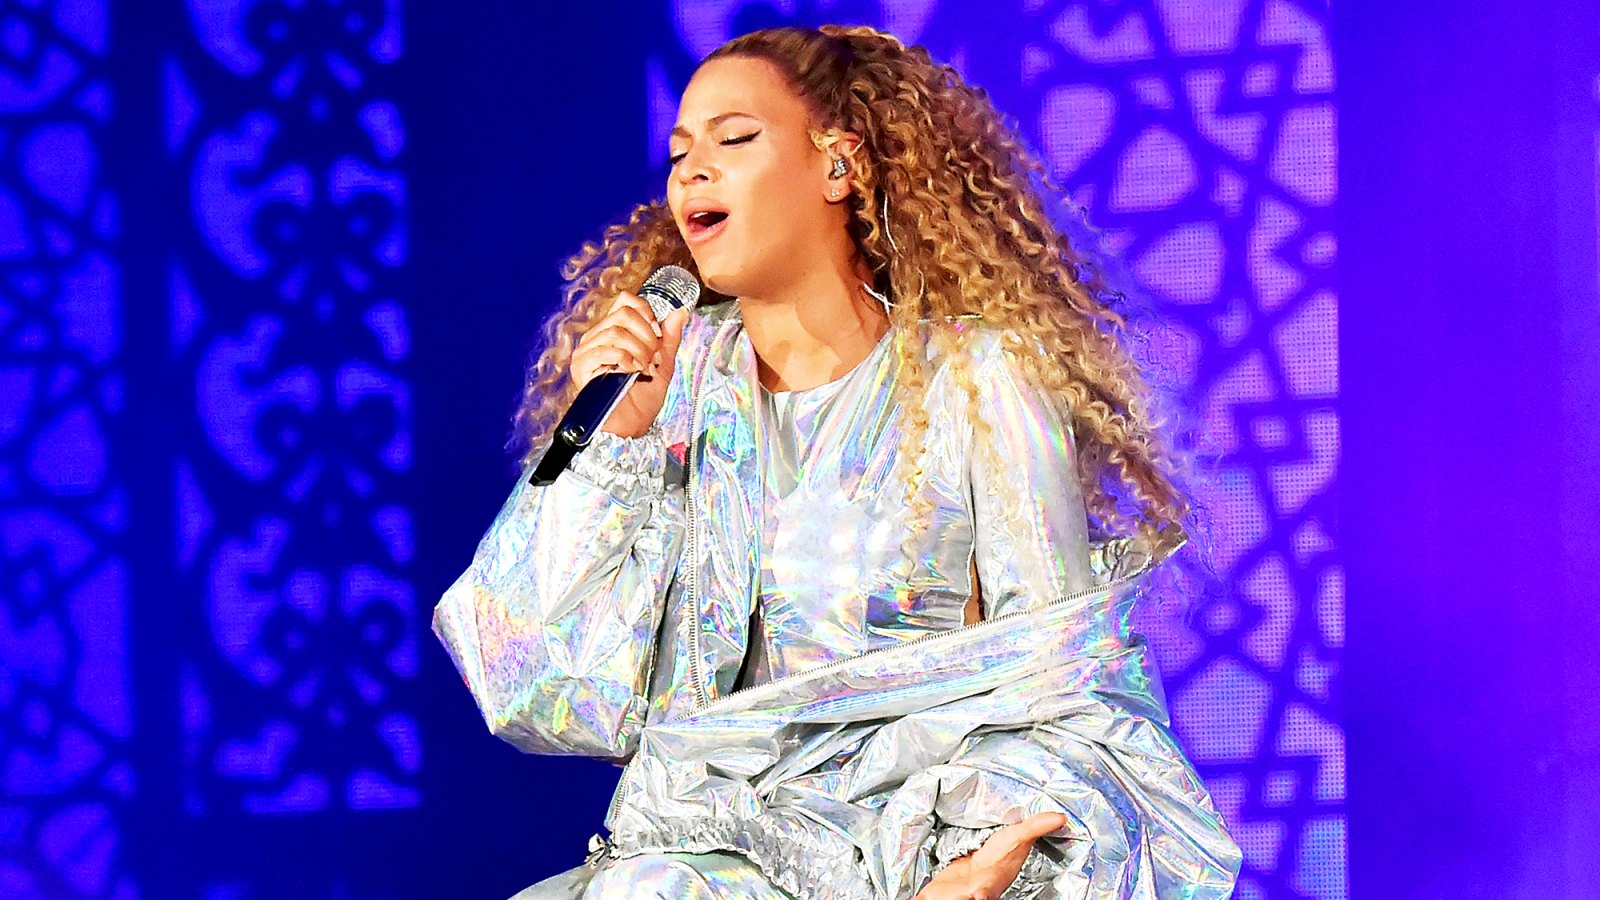 Beyonce performs on stage during the "On the Run II" tour opener at Principality Stadium on June 6, 2018 in Cardiff, Wales.